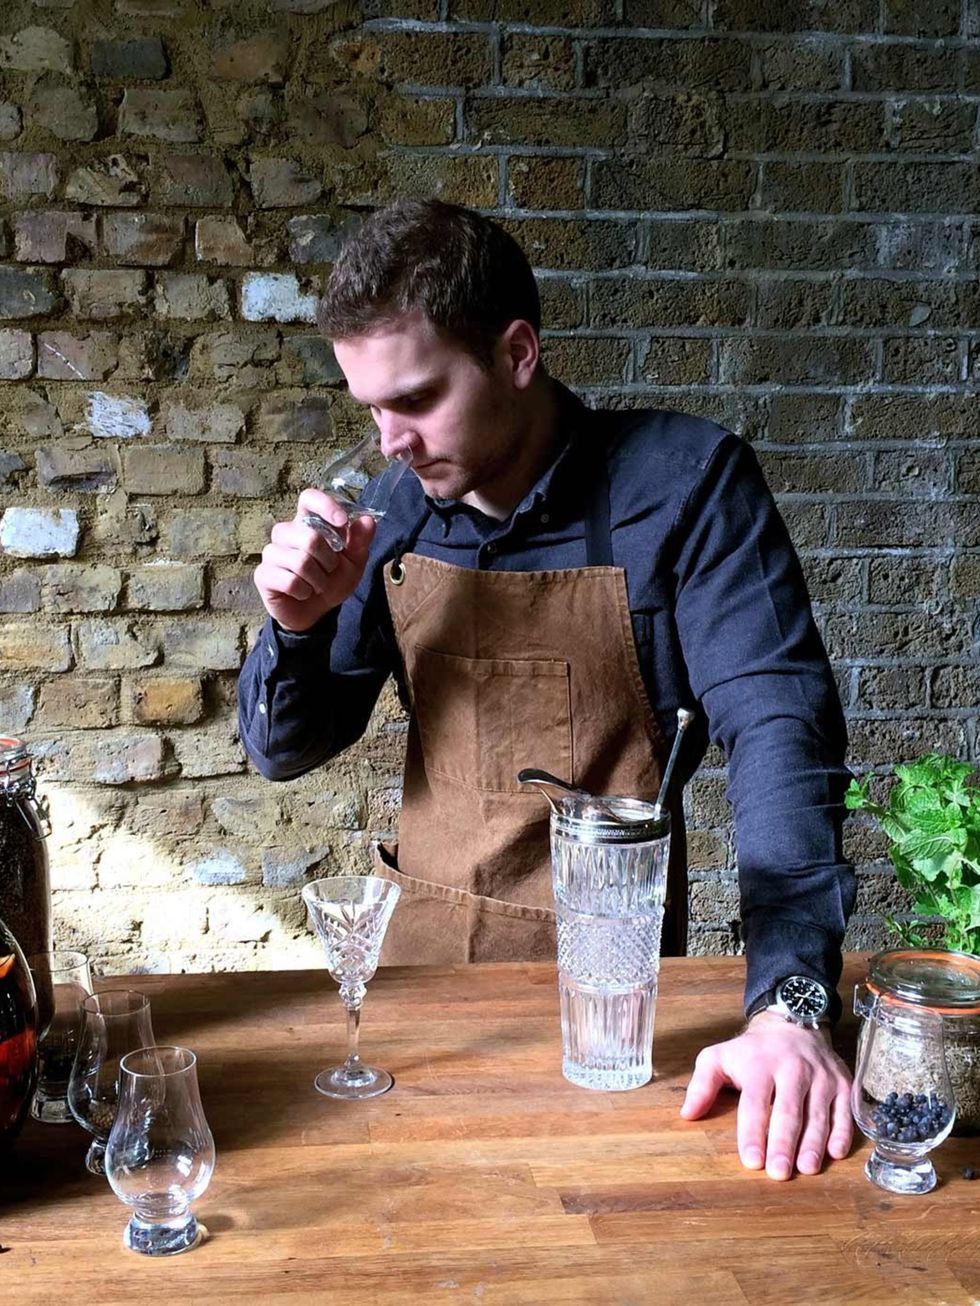 &lt;p&gt;&lt;strong&gt;FOOD AND DRINK: Junipalooza&lt;/strong&gt;&lt;/p&gt;&lt;p&gt;Upgrade your usual cocktail this weekend and head to Junipalooza for the best G&amp;T you&rsquo;ve ever tasted.&lt;/p&gt;&lt;p&gt;Become a connoisseur of the spirit as you